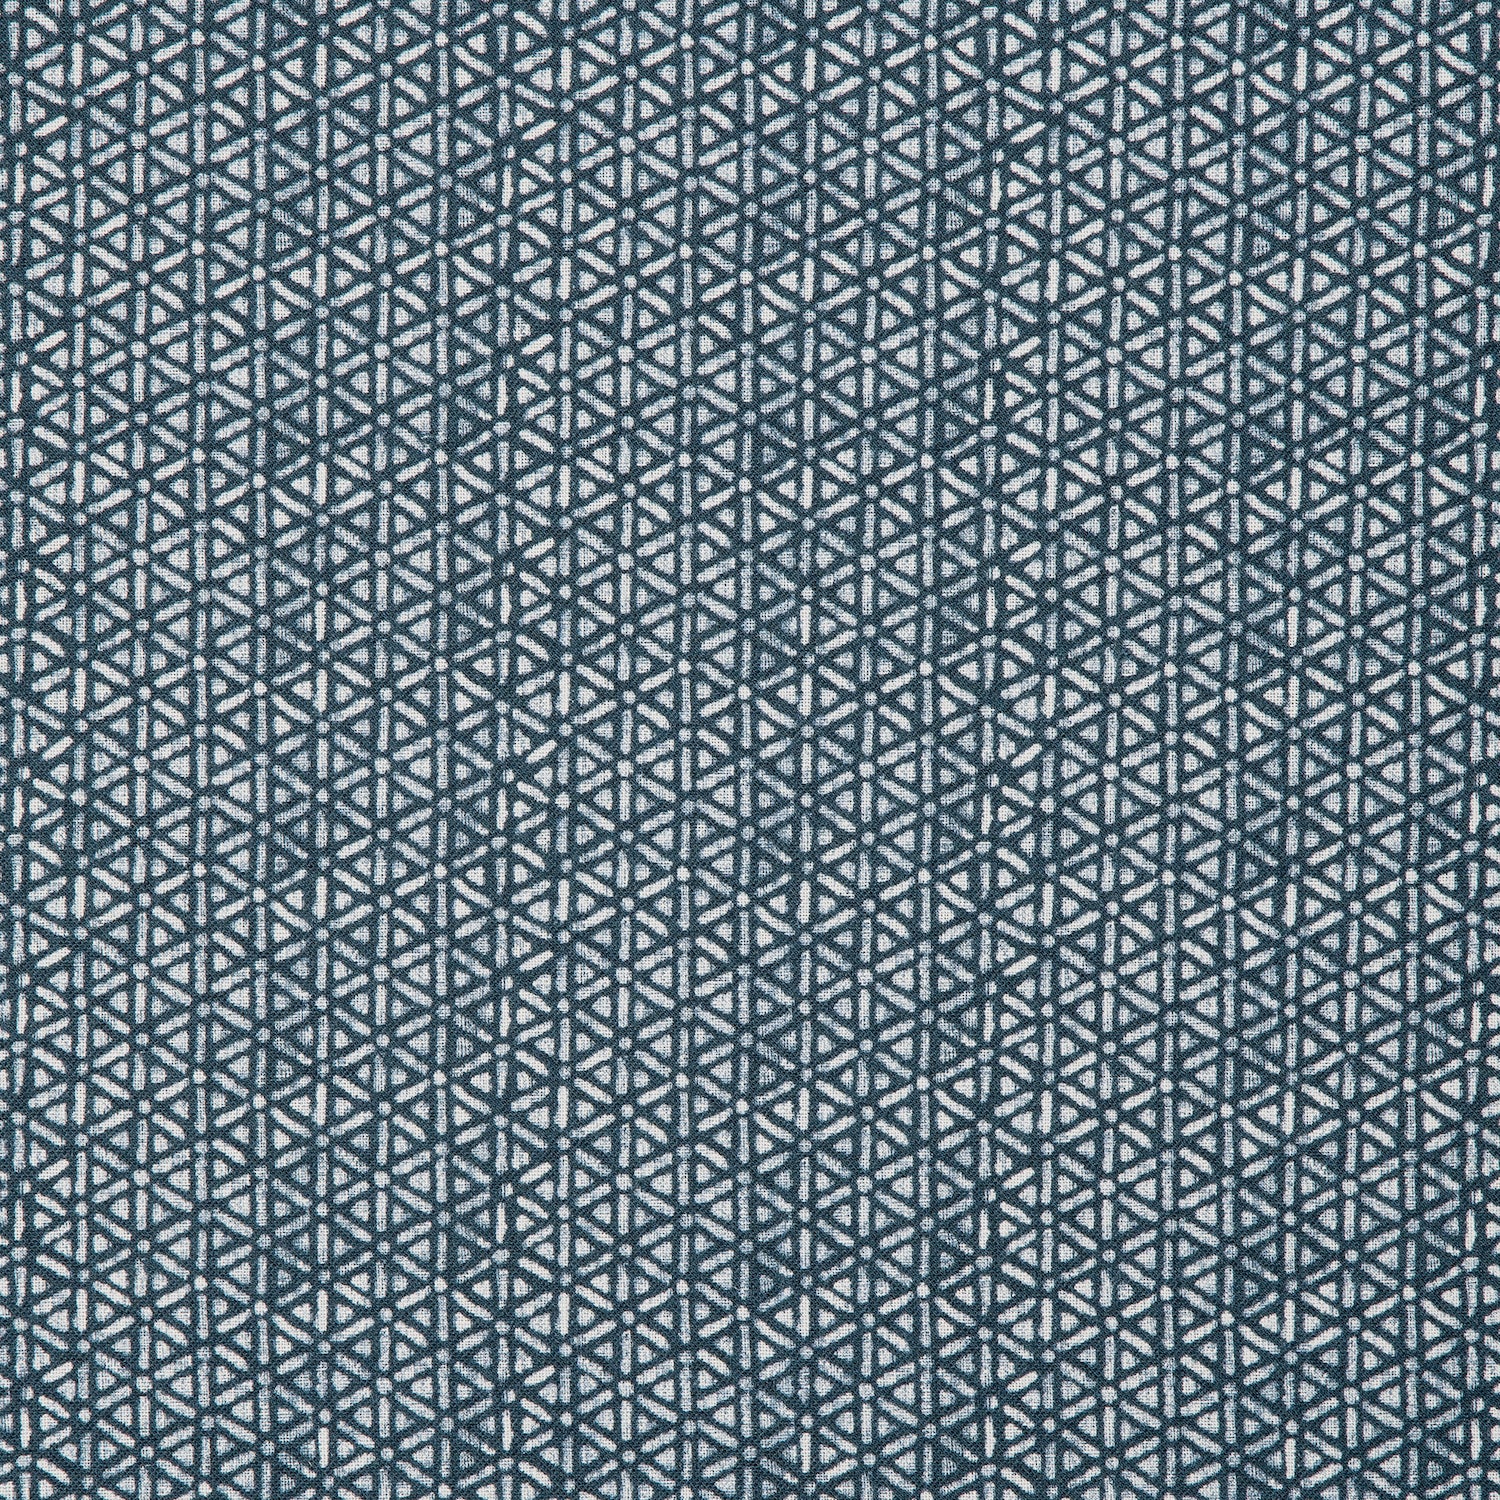 Detail of a linen fabric in a detailed geometric pattern in white on an indigo field.